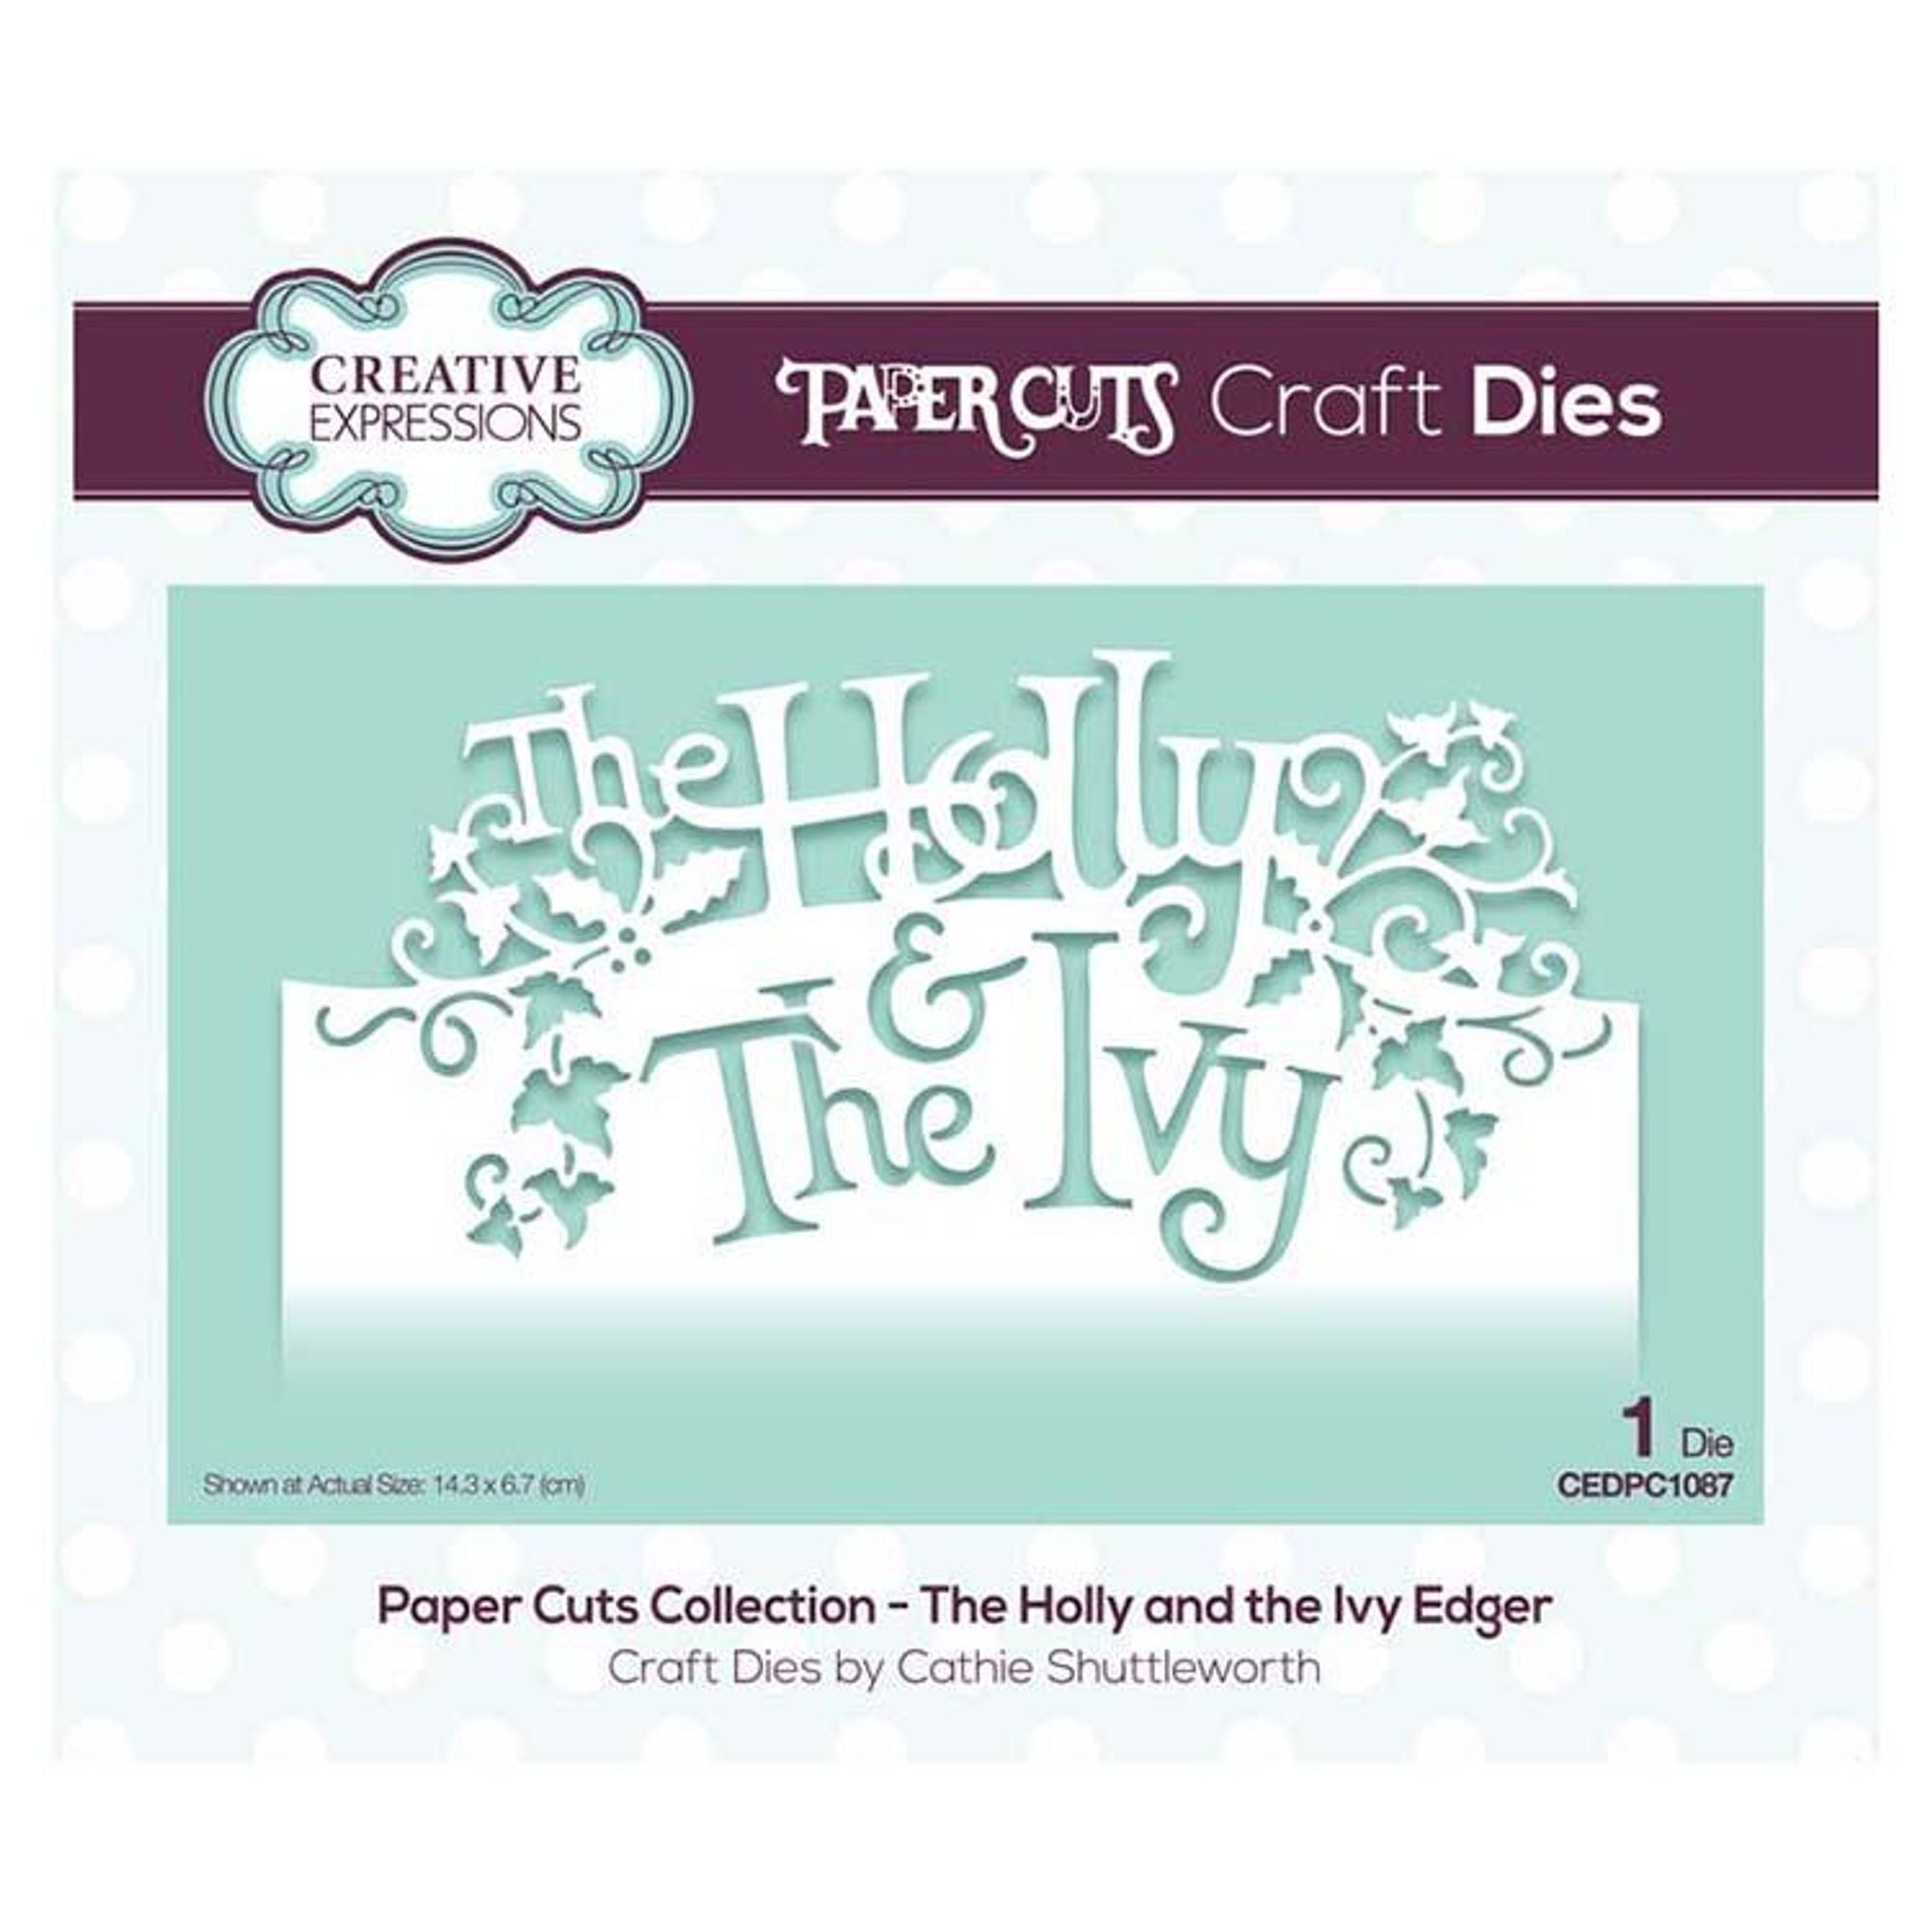 Creative Expressions Paper Cuts Collection - The Holly and the Ivy